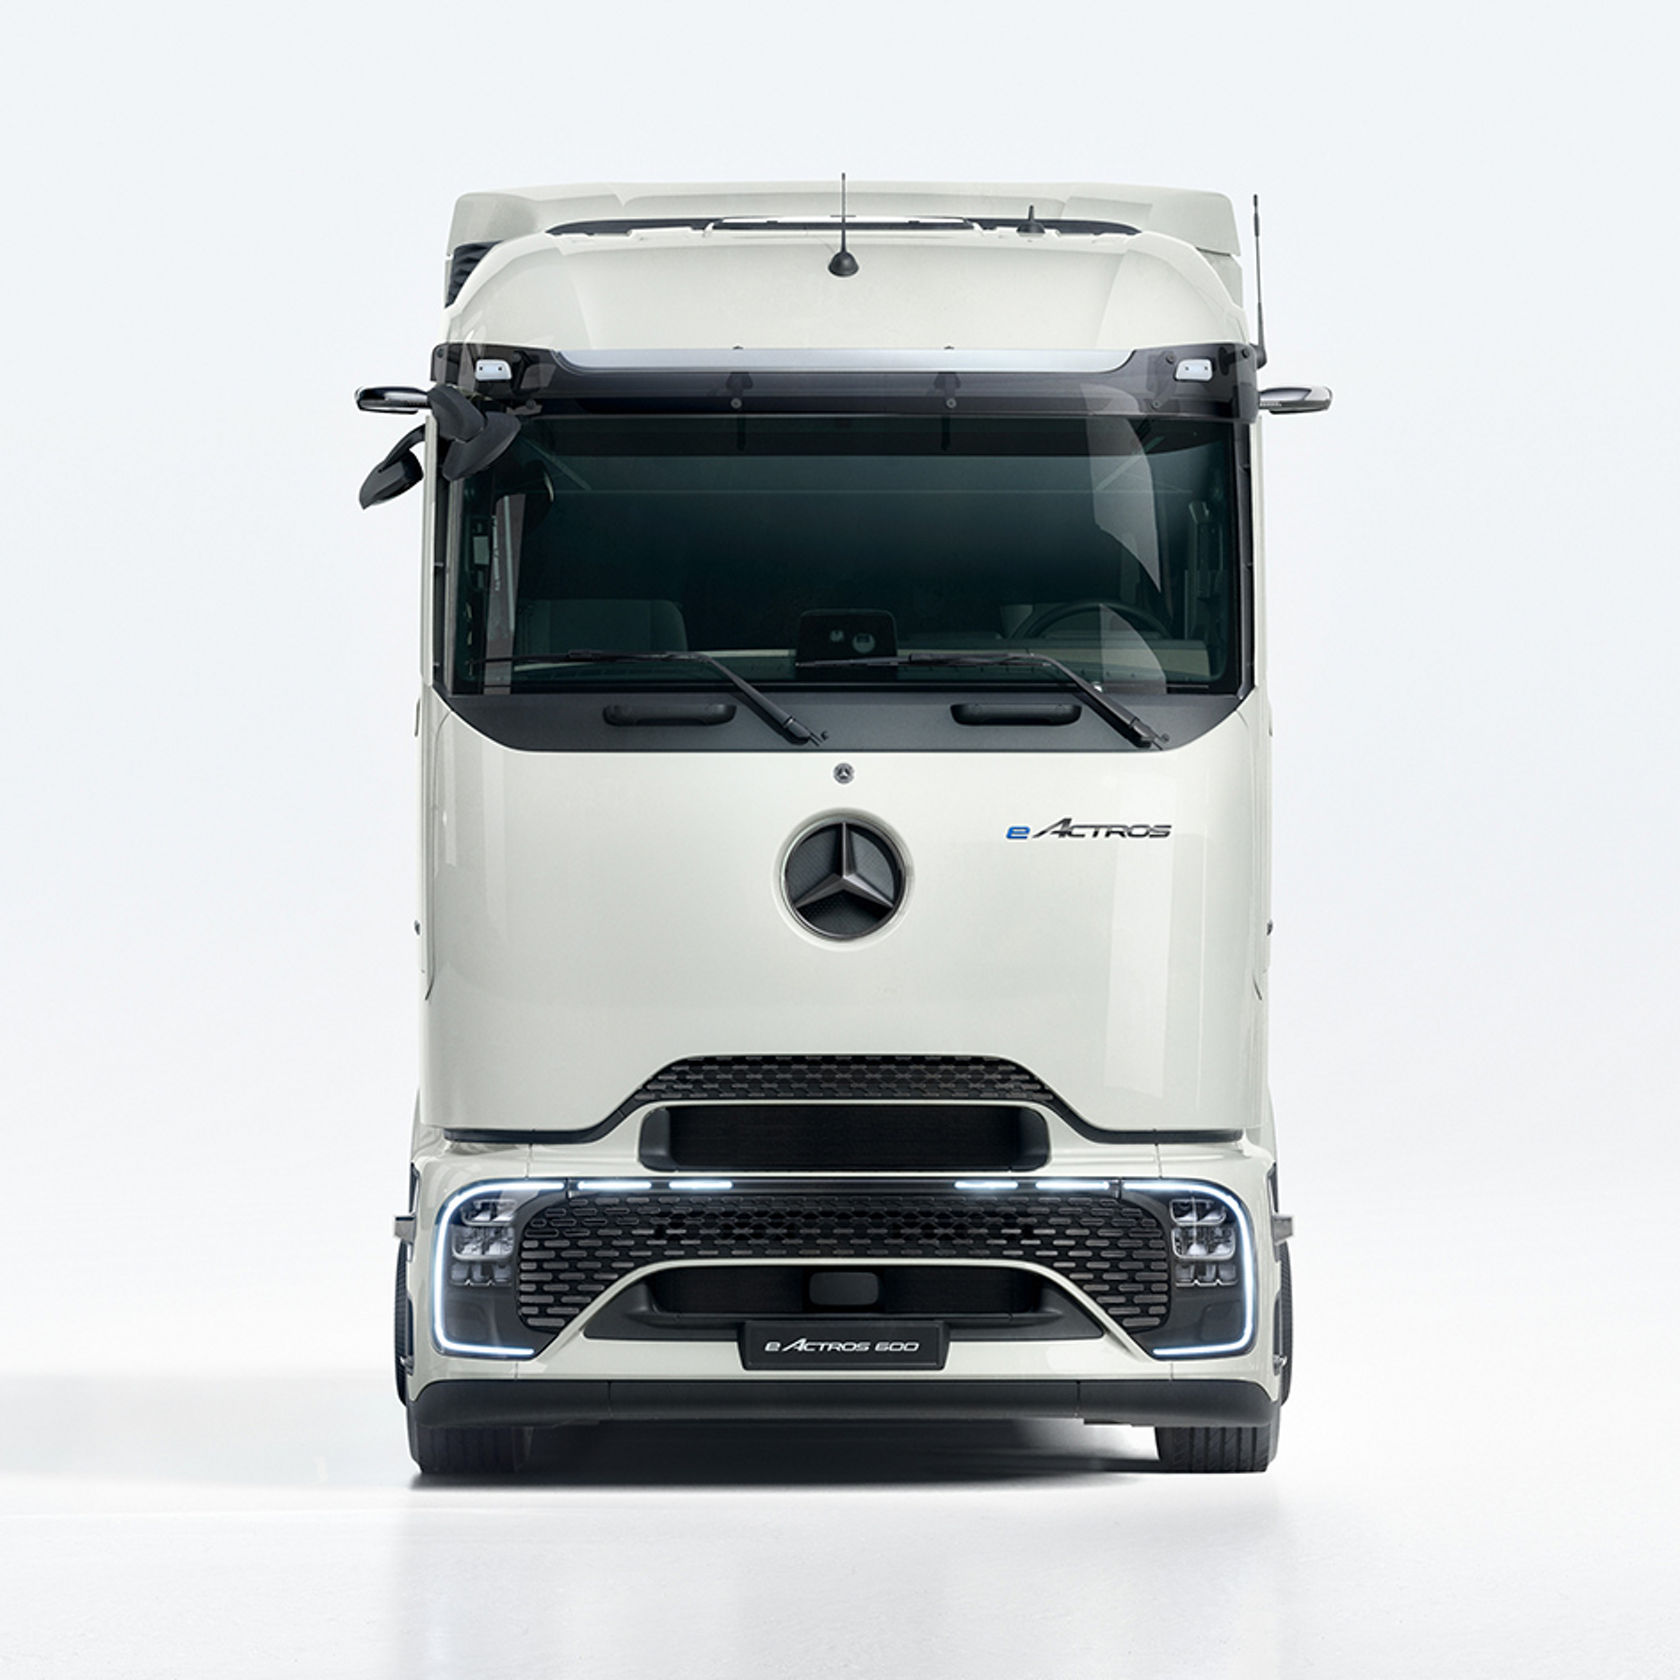 The eActros 600 in detail.